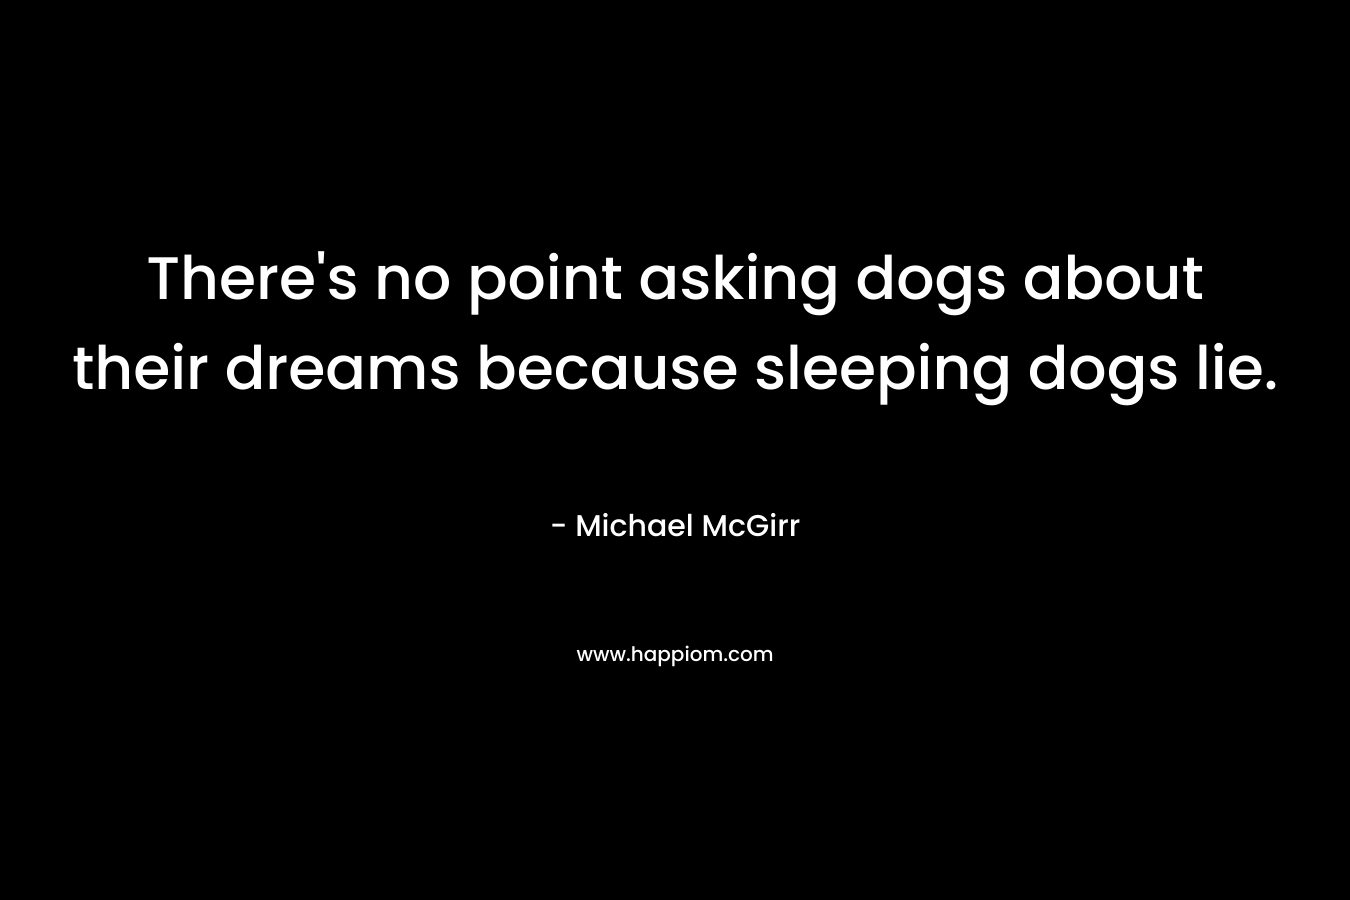 There’s no point asking dogs about their dreams because sleeping dogs lie. – Michael McGirr